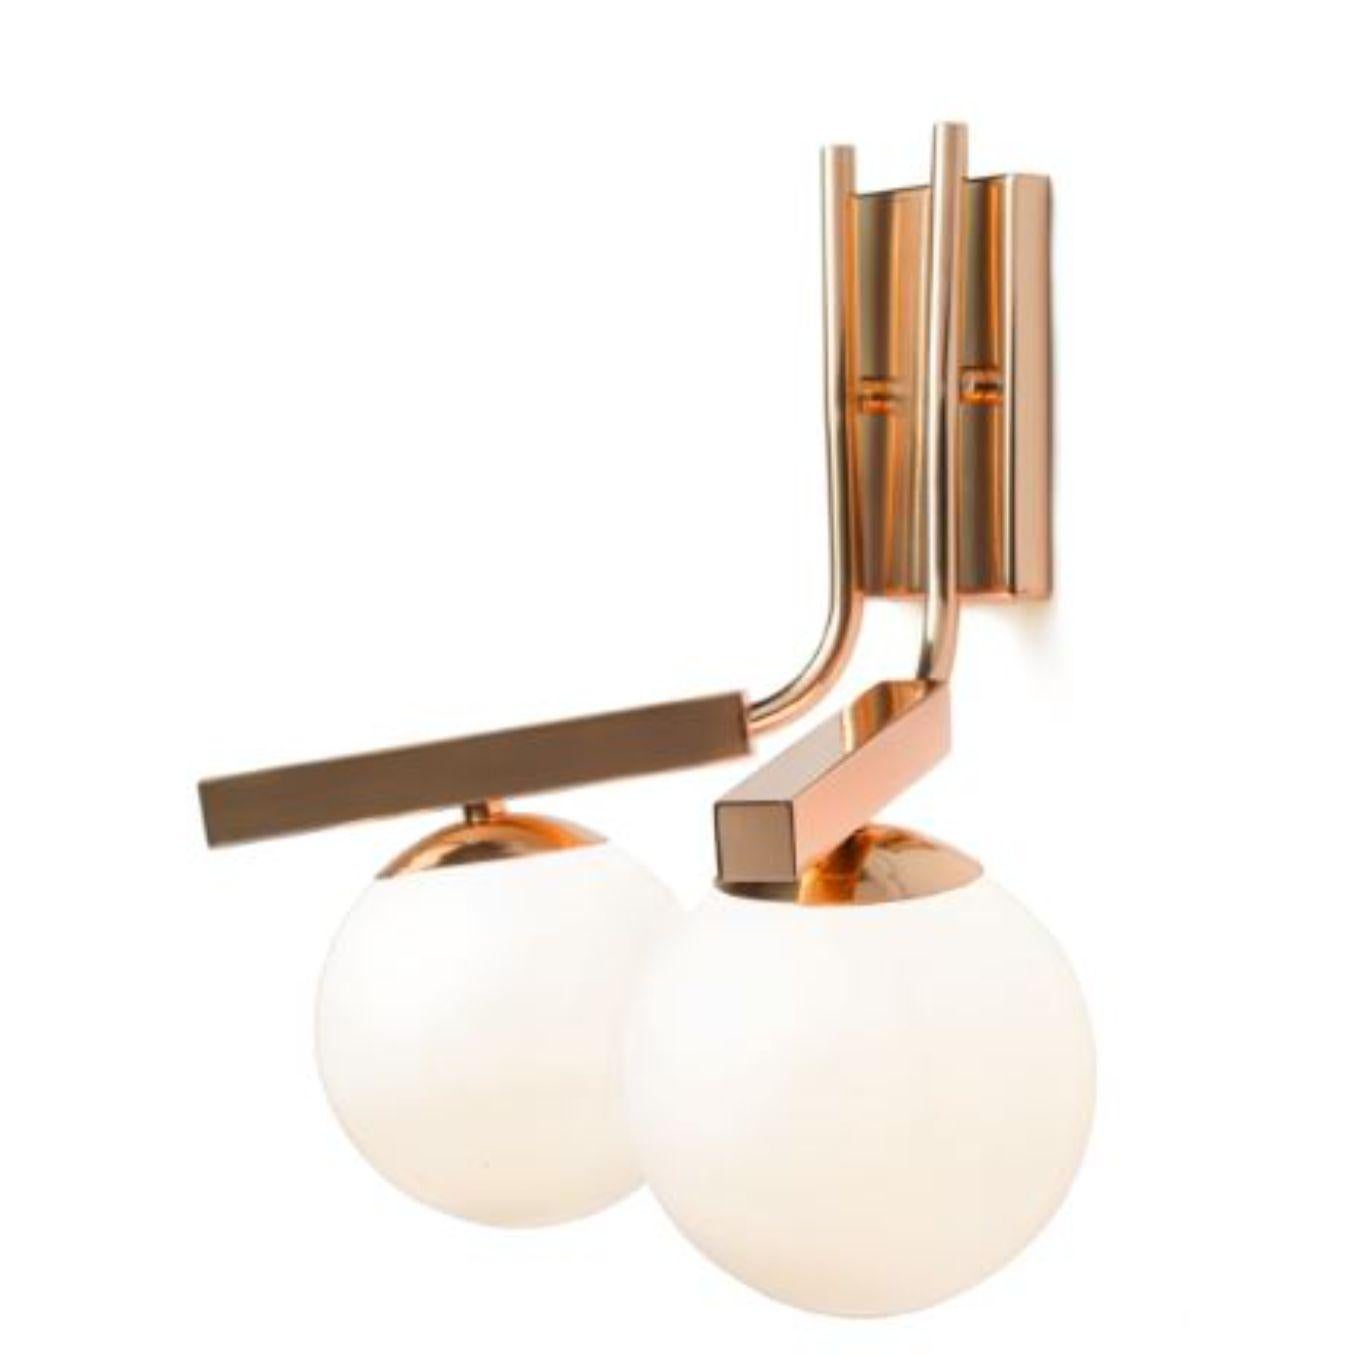 Copper globe wall lamp by Dooq
Dimensions: W 36 x D 33 x H 41 cm
Materials: lacquered metal, polished or brushed metal, copper.
Also available in different colours and materials.

Information:
230V/50Hz
2 x max. G9
4W LED

120V/60Hz
2 x max. G9
4W